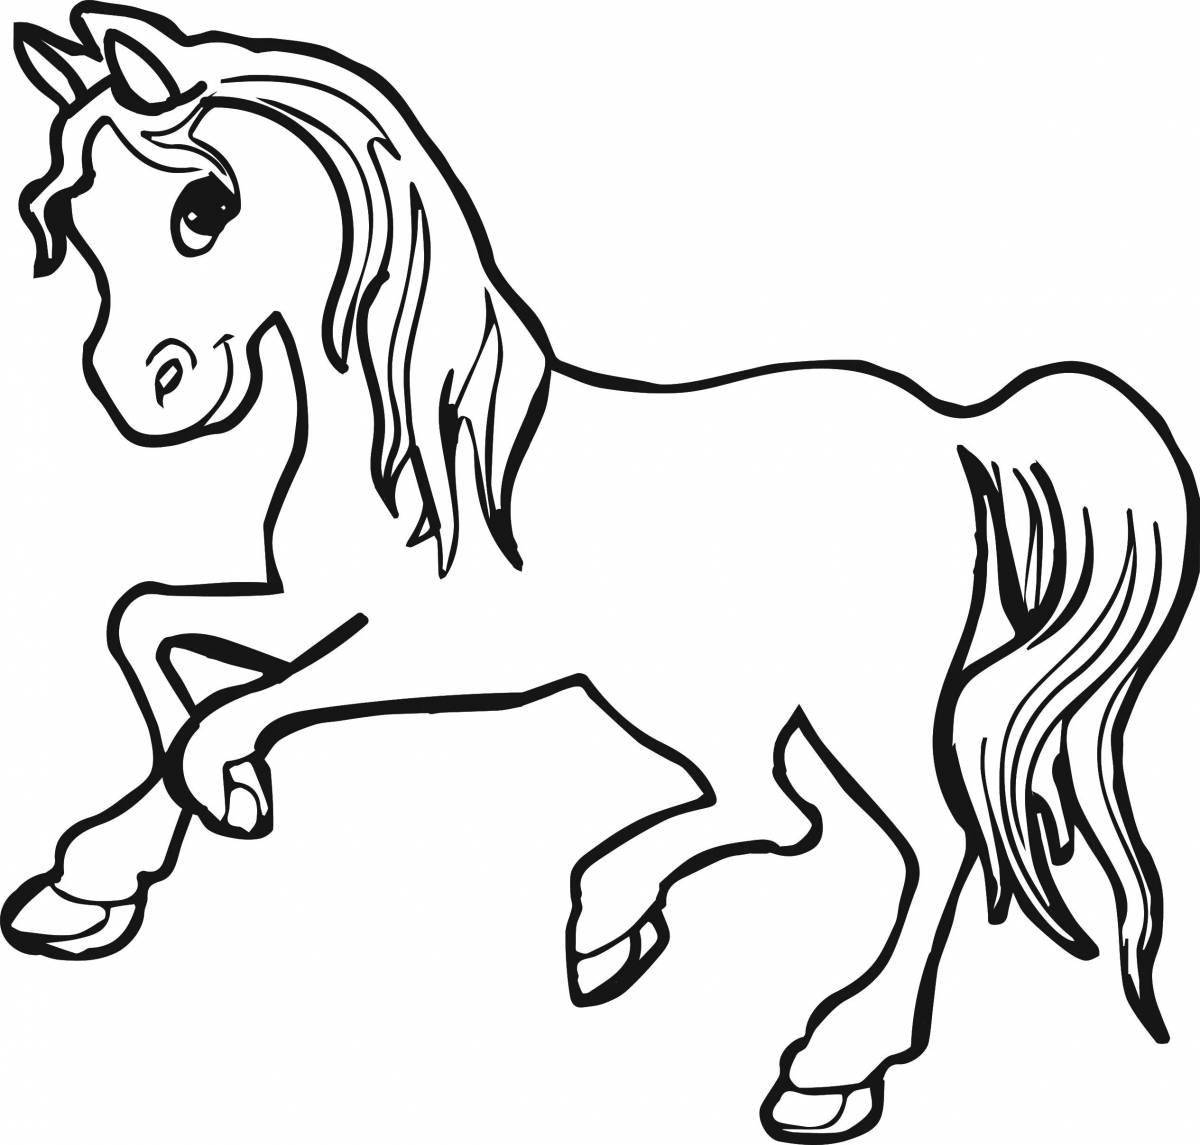 Adorable horse coloring book for 4-5 year olds